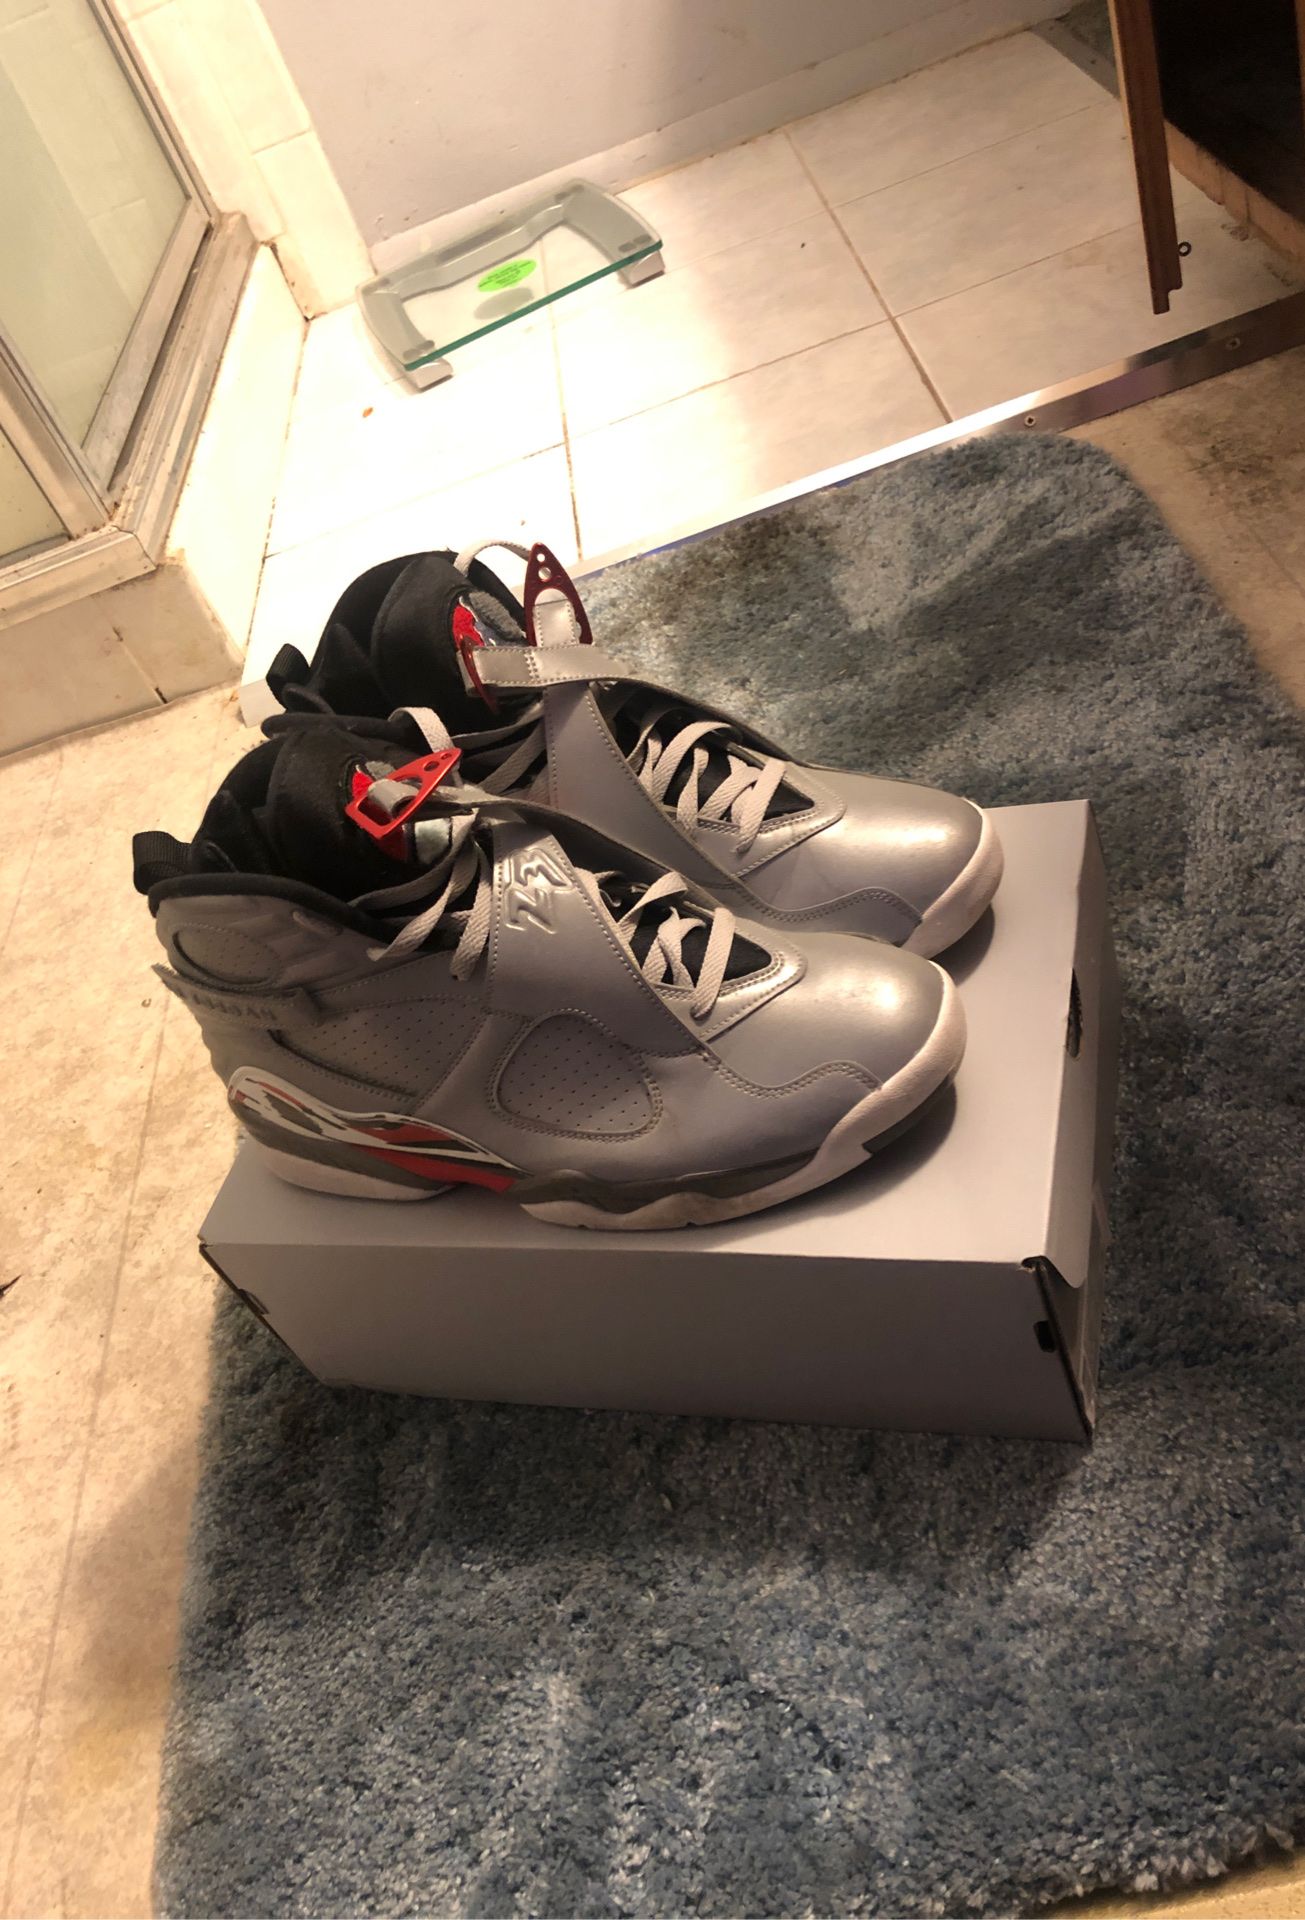 Jordan 8 Retro Reflections of a Champion, worn once, Great condition